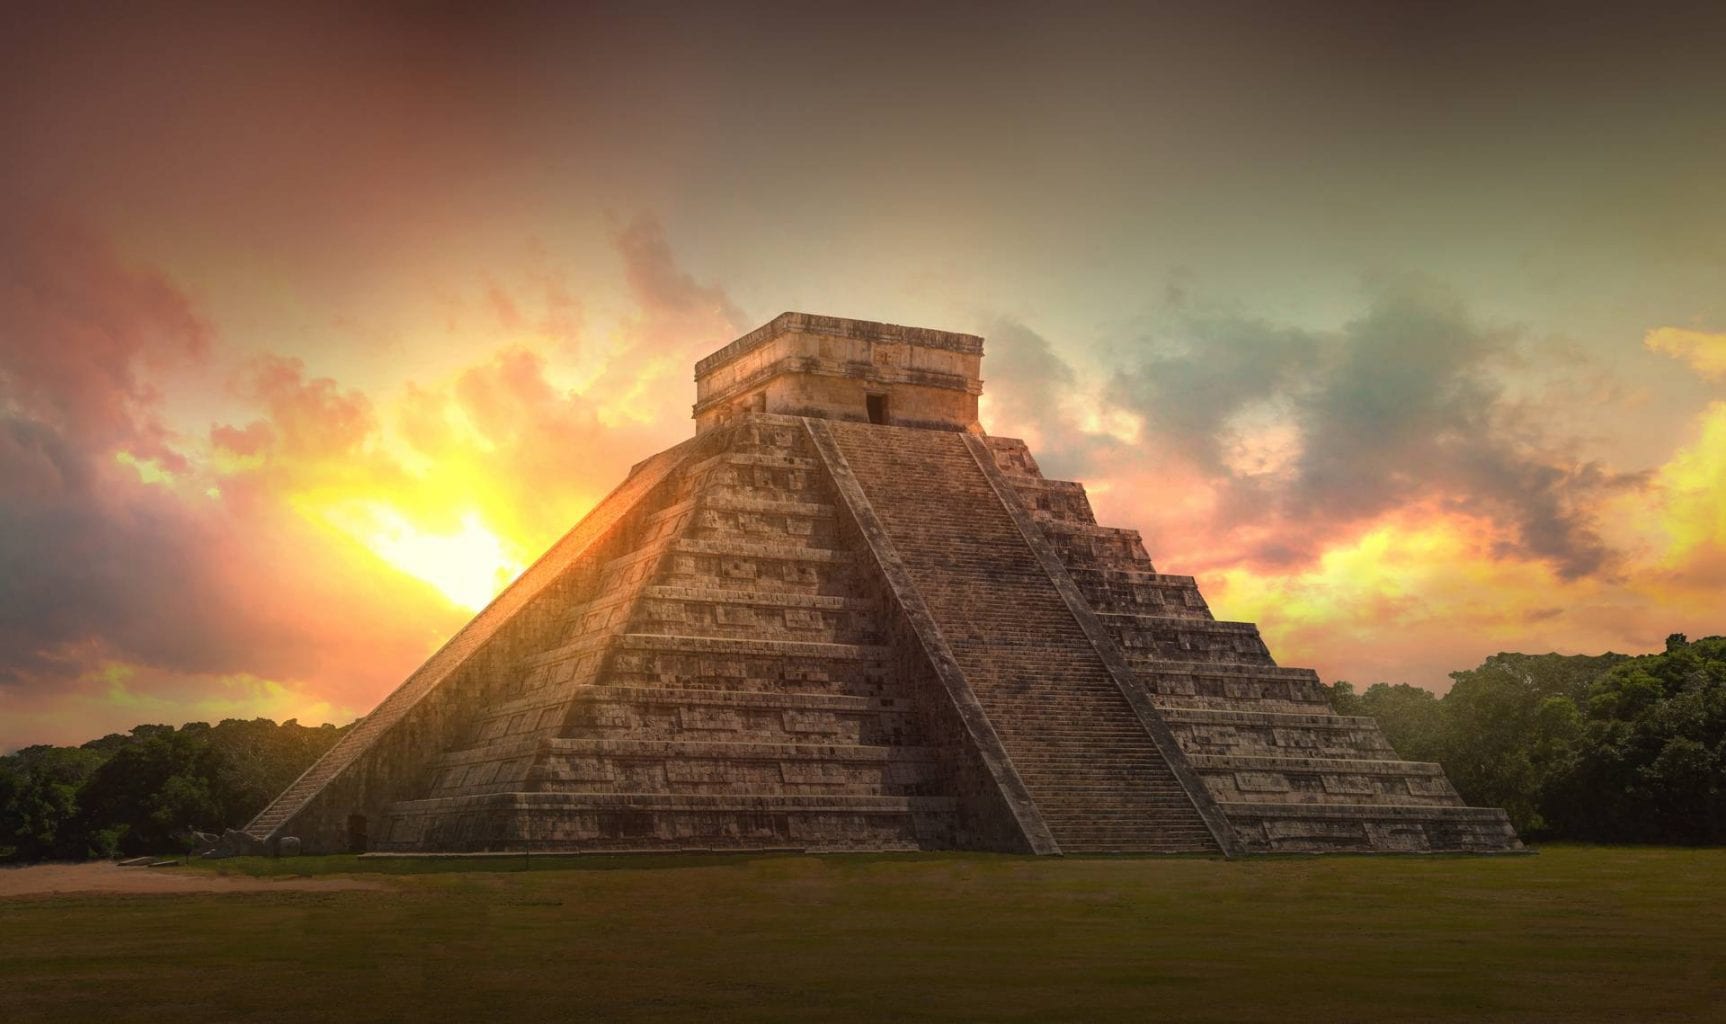 The marvelous step pyramid at Chichen Itza.